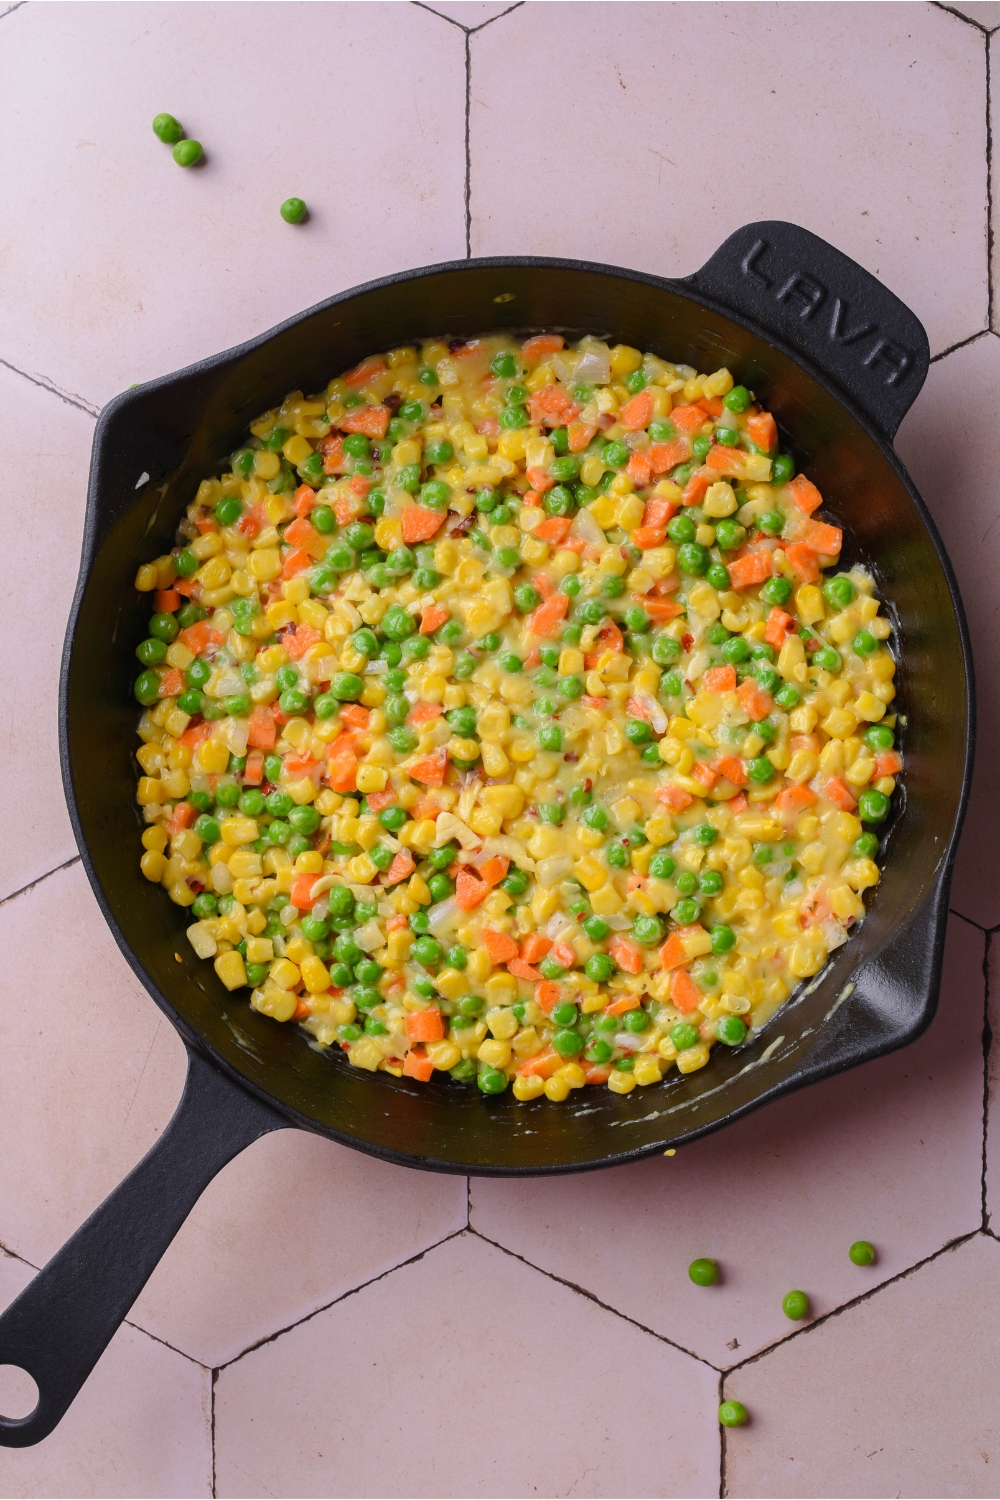 A cast iron skillet with veggies cooking.